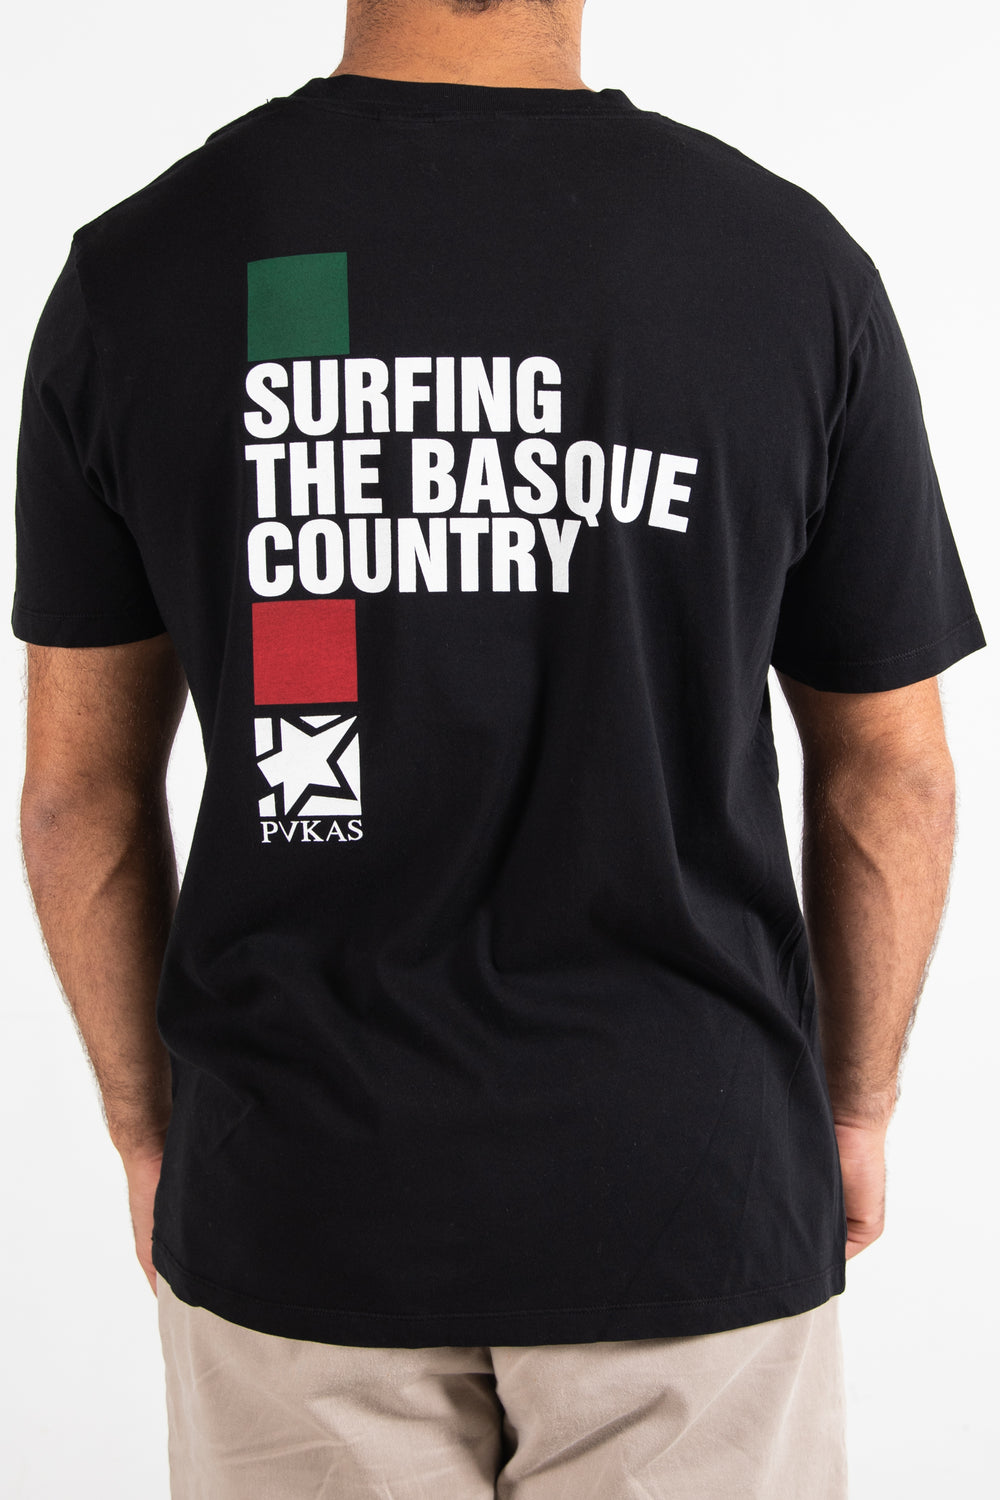    Pukas-Surf-Shop-Surfing-the-Basque-Country